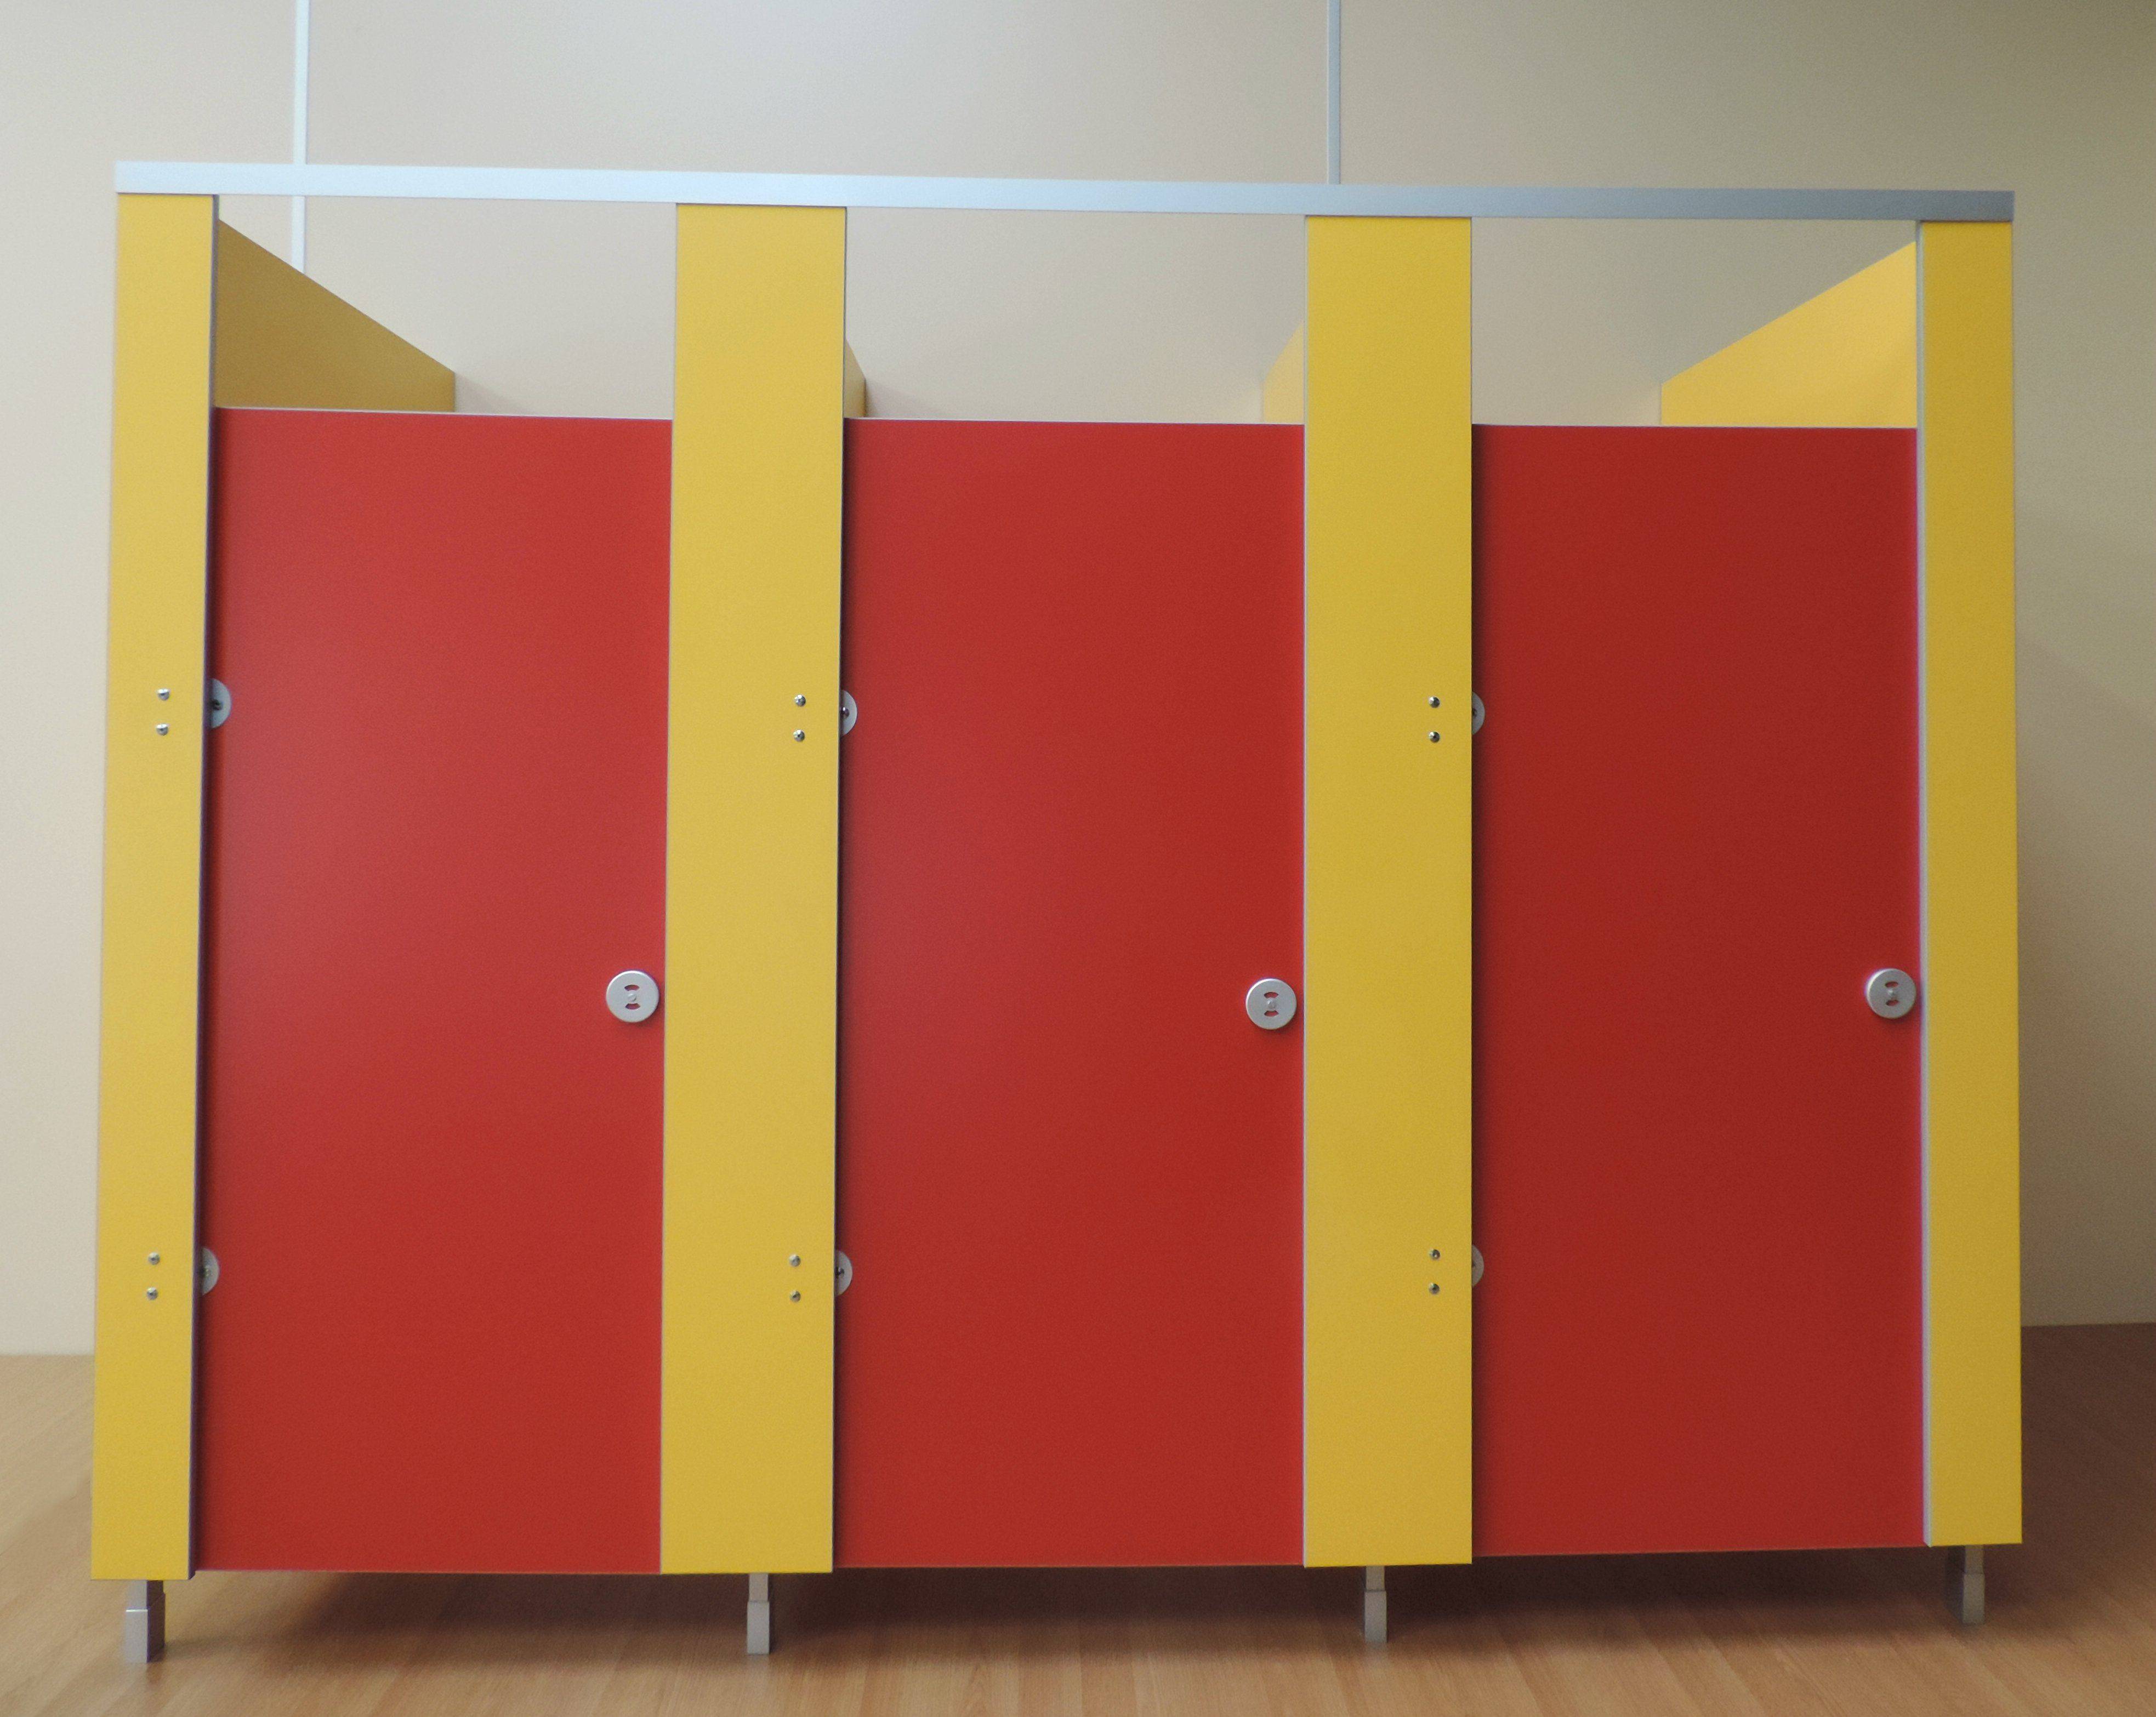 Suppliers Of Toilet Cubicles For Schools UK